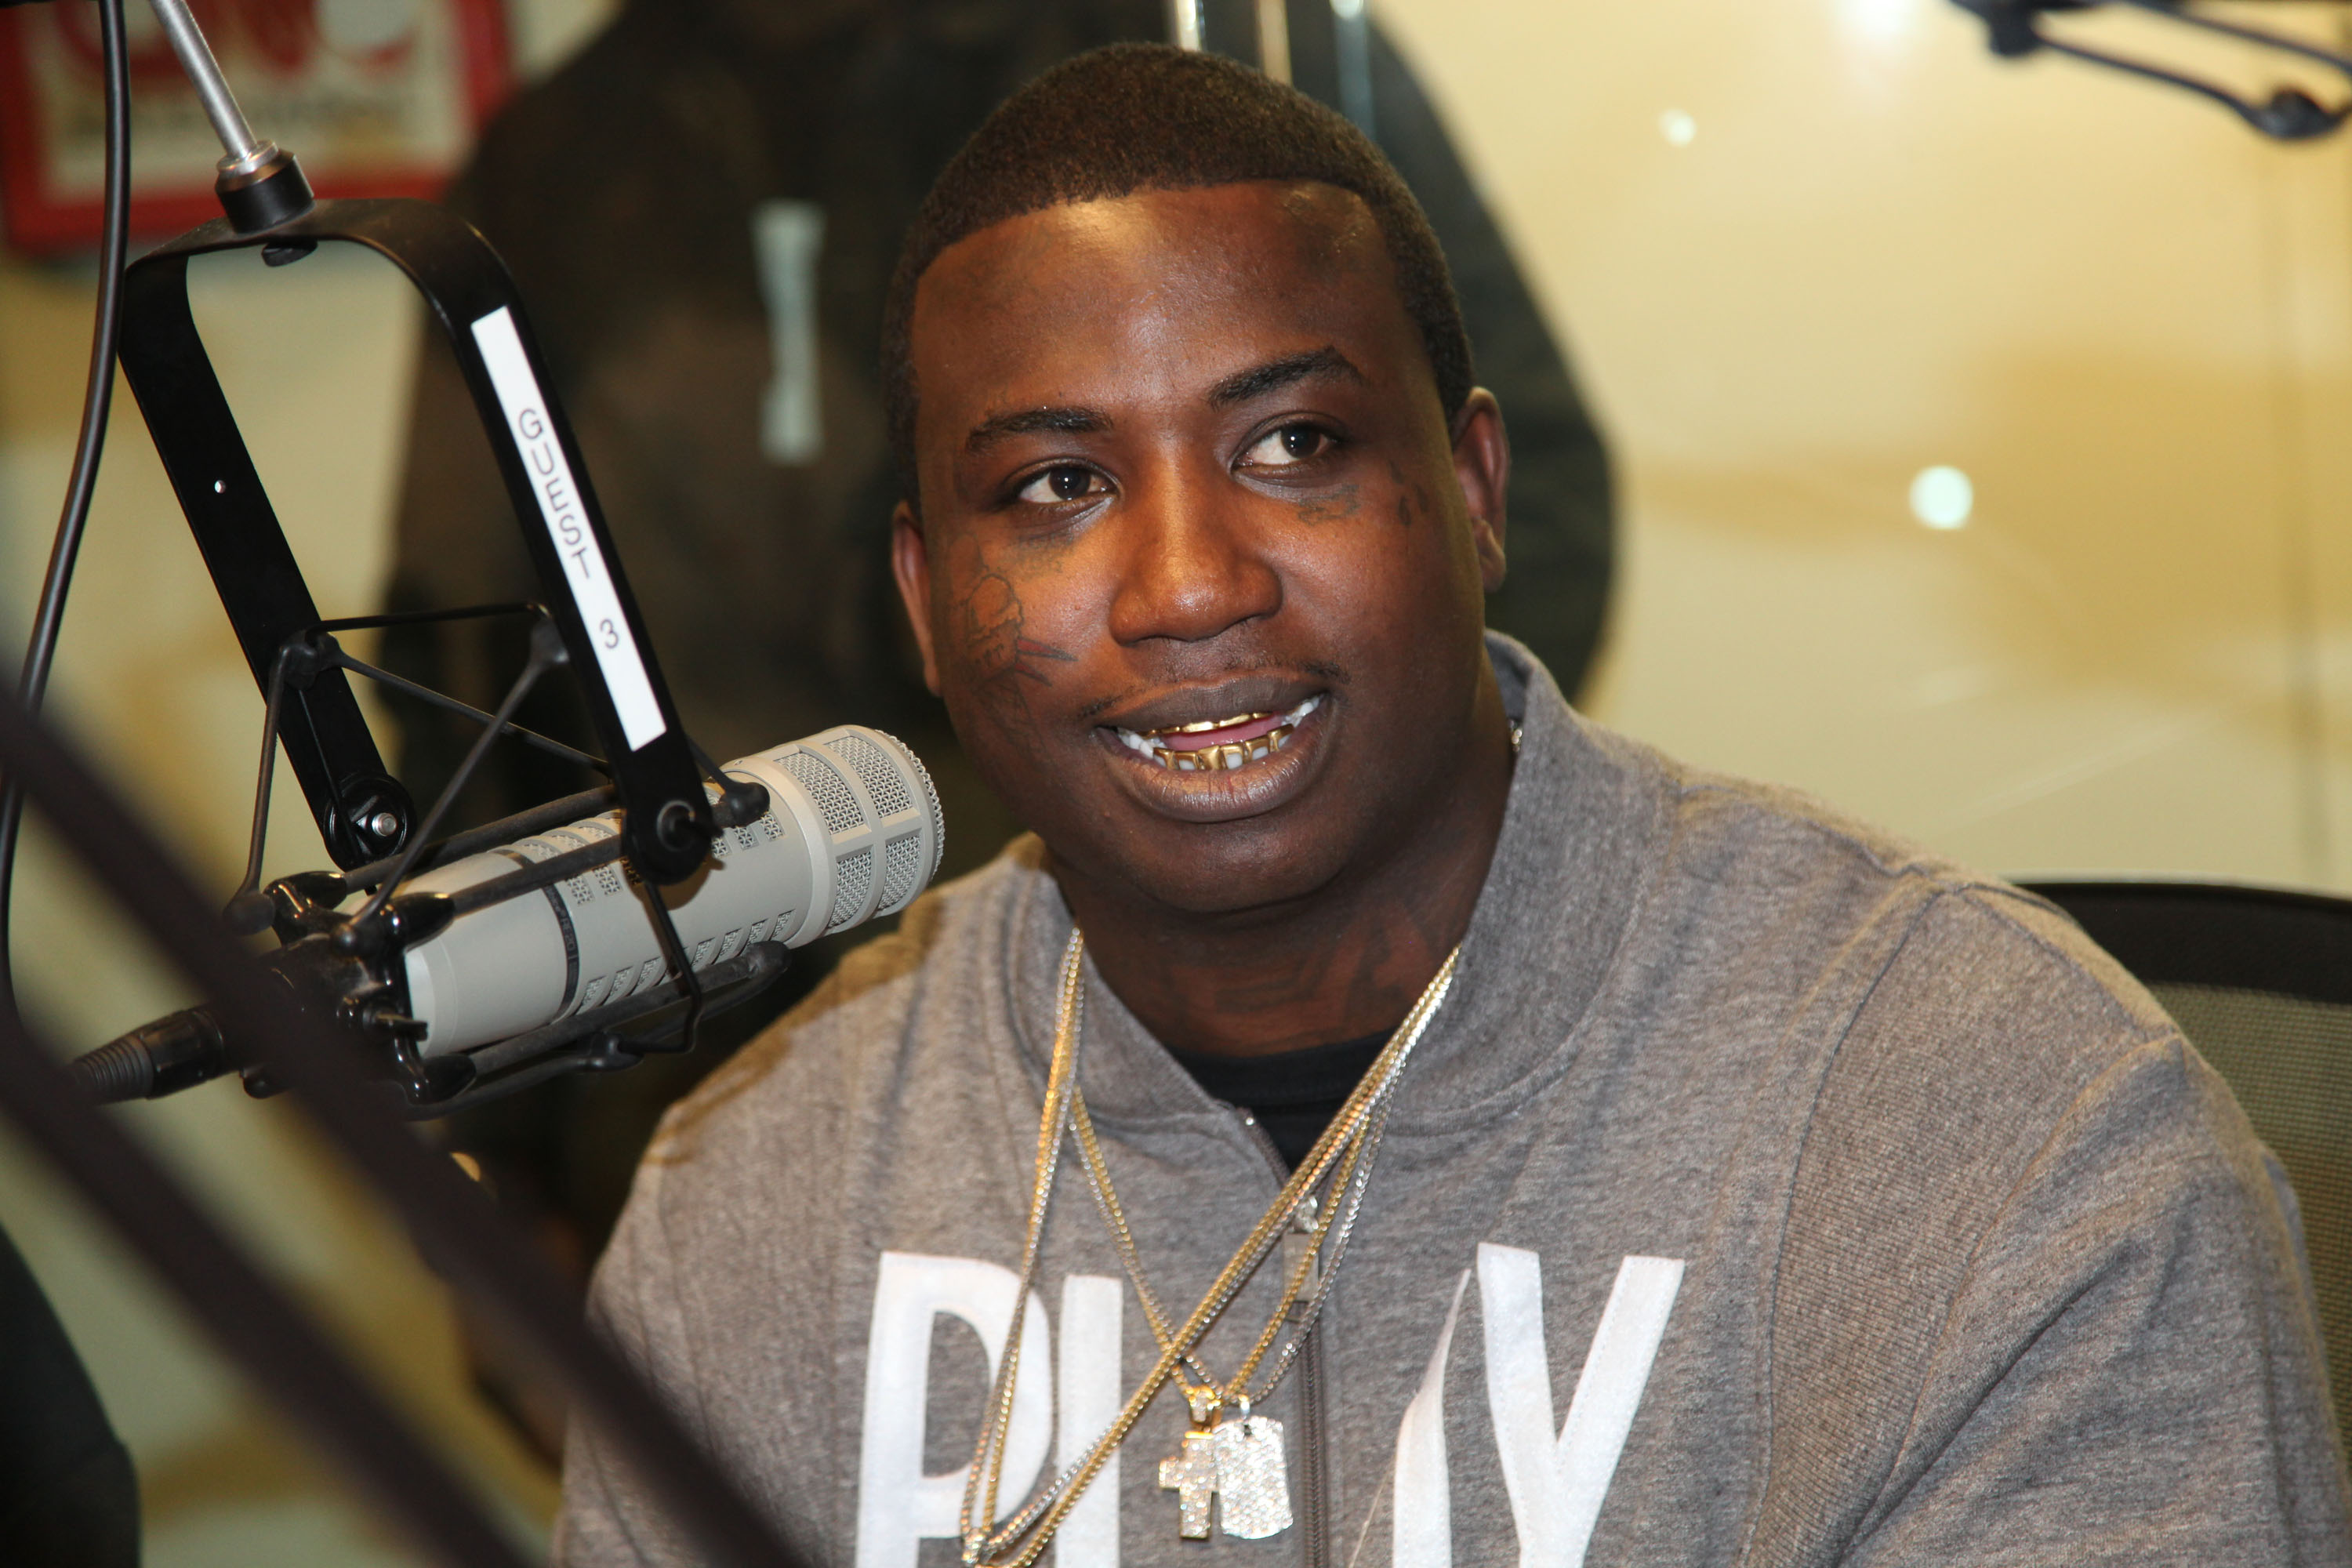 Gucci Mane Sets the Record Straight on How to Keep Your Wife Happy